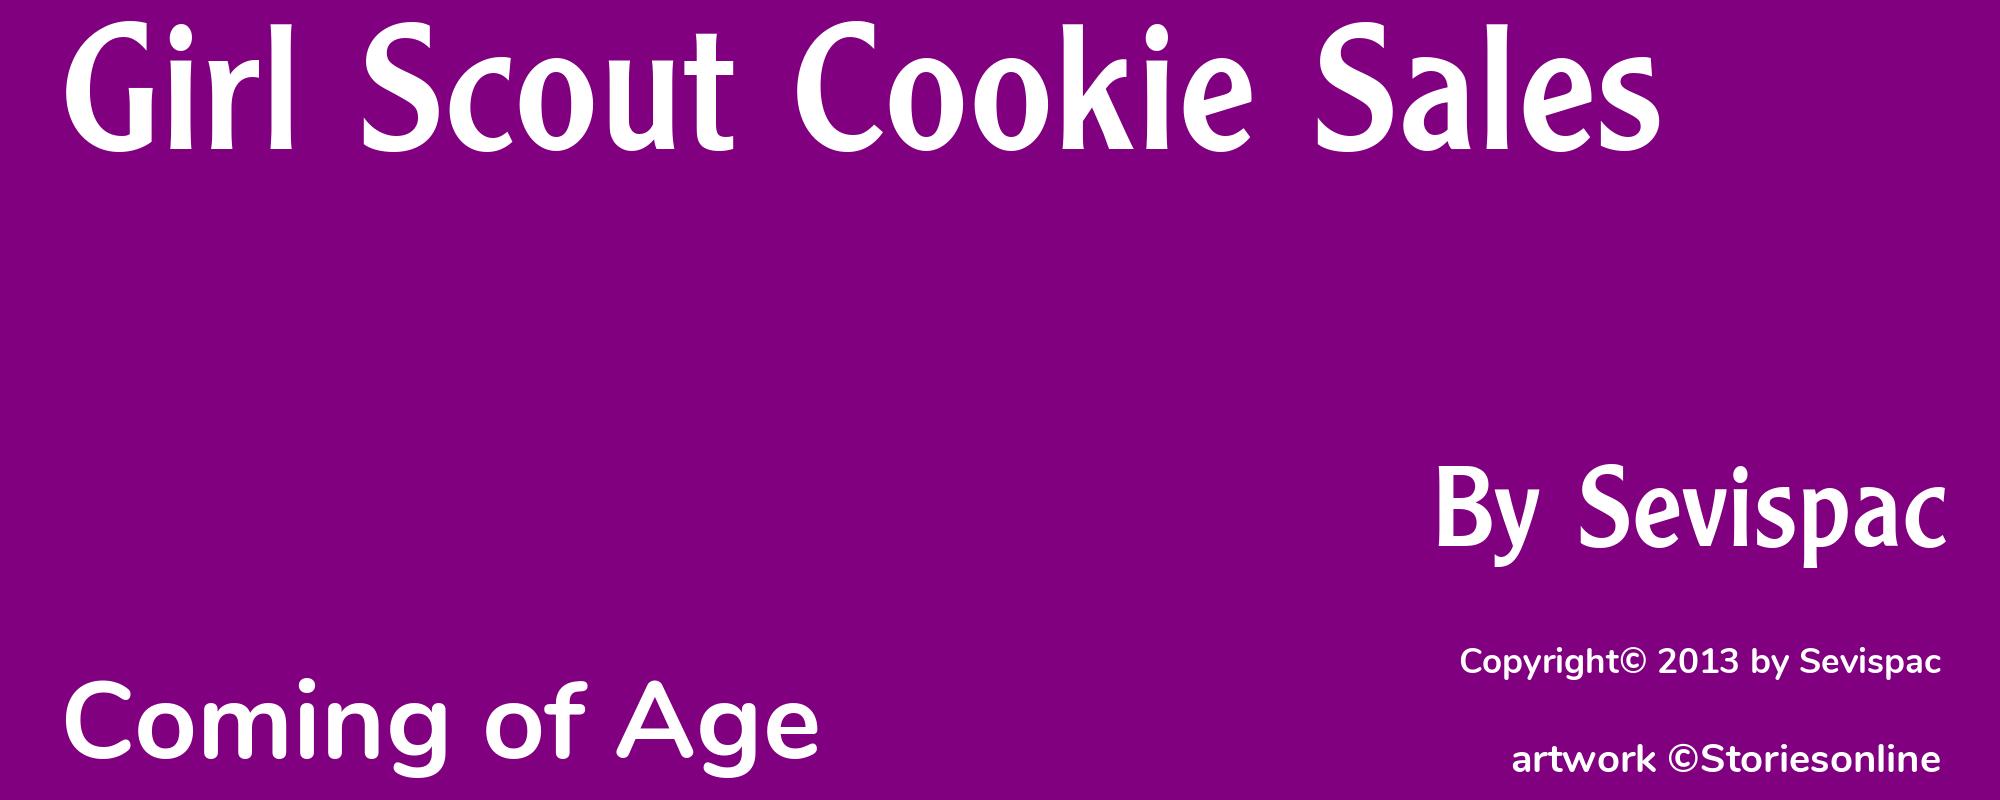 Girl Scout Cookie Sales - Cover